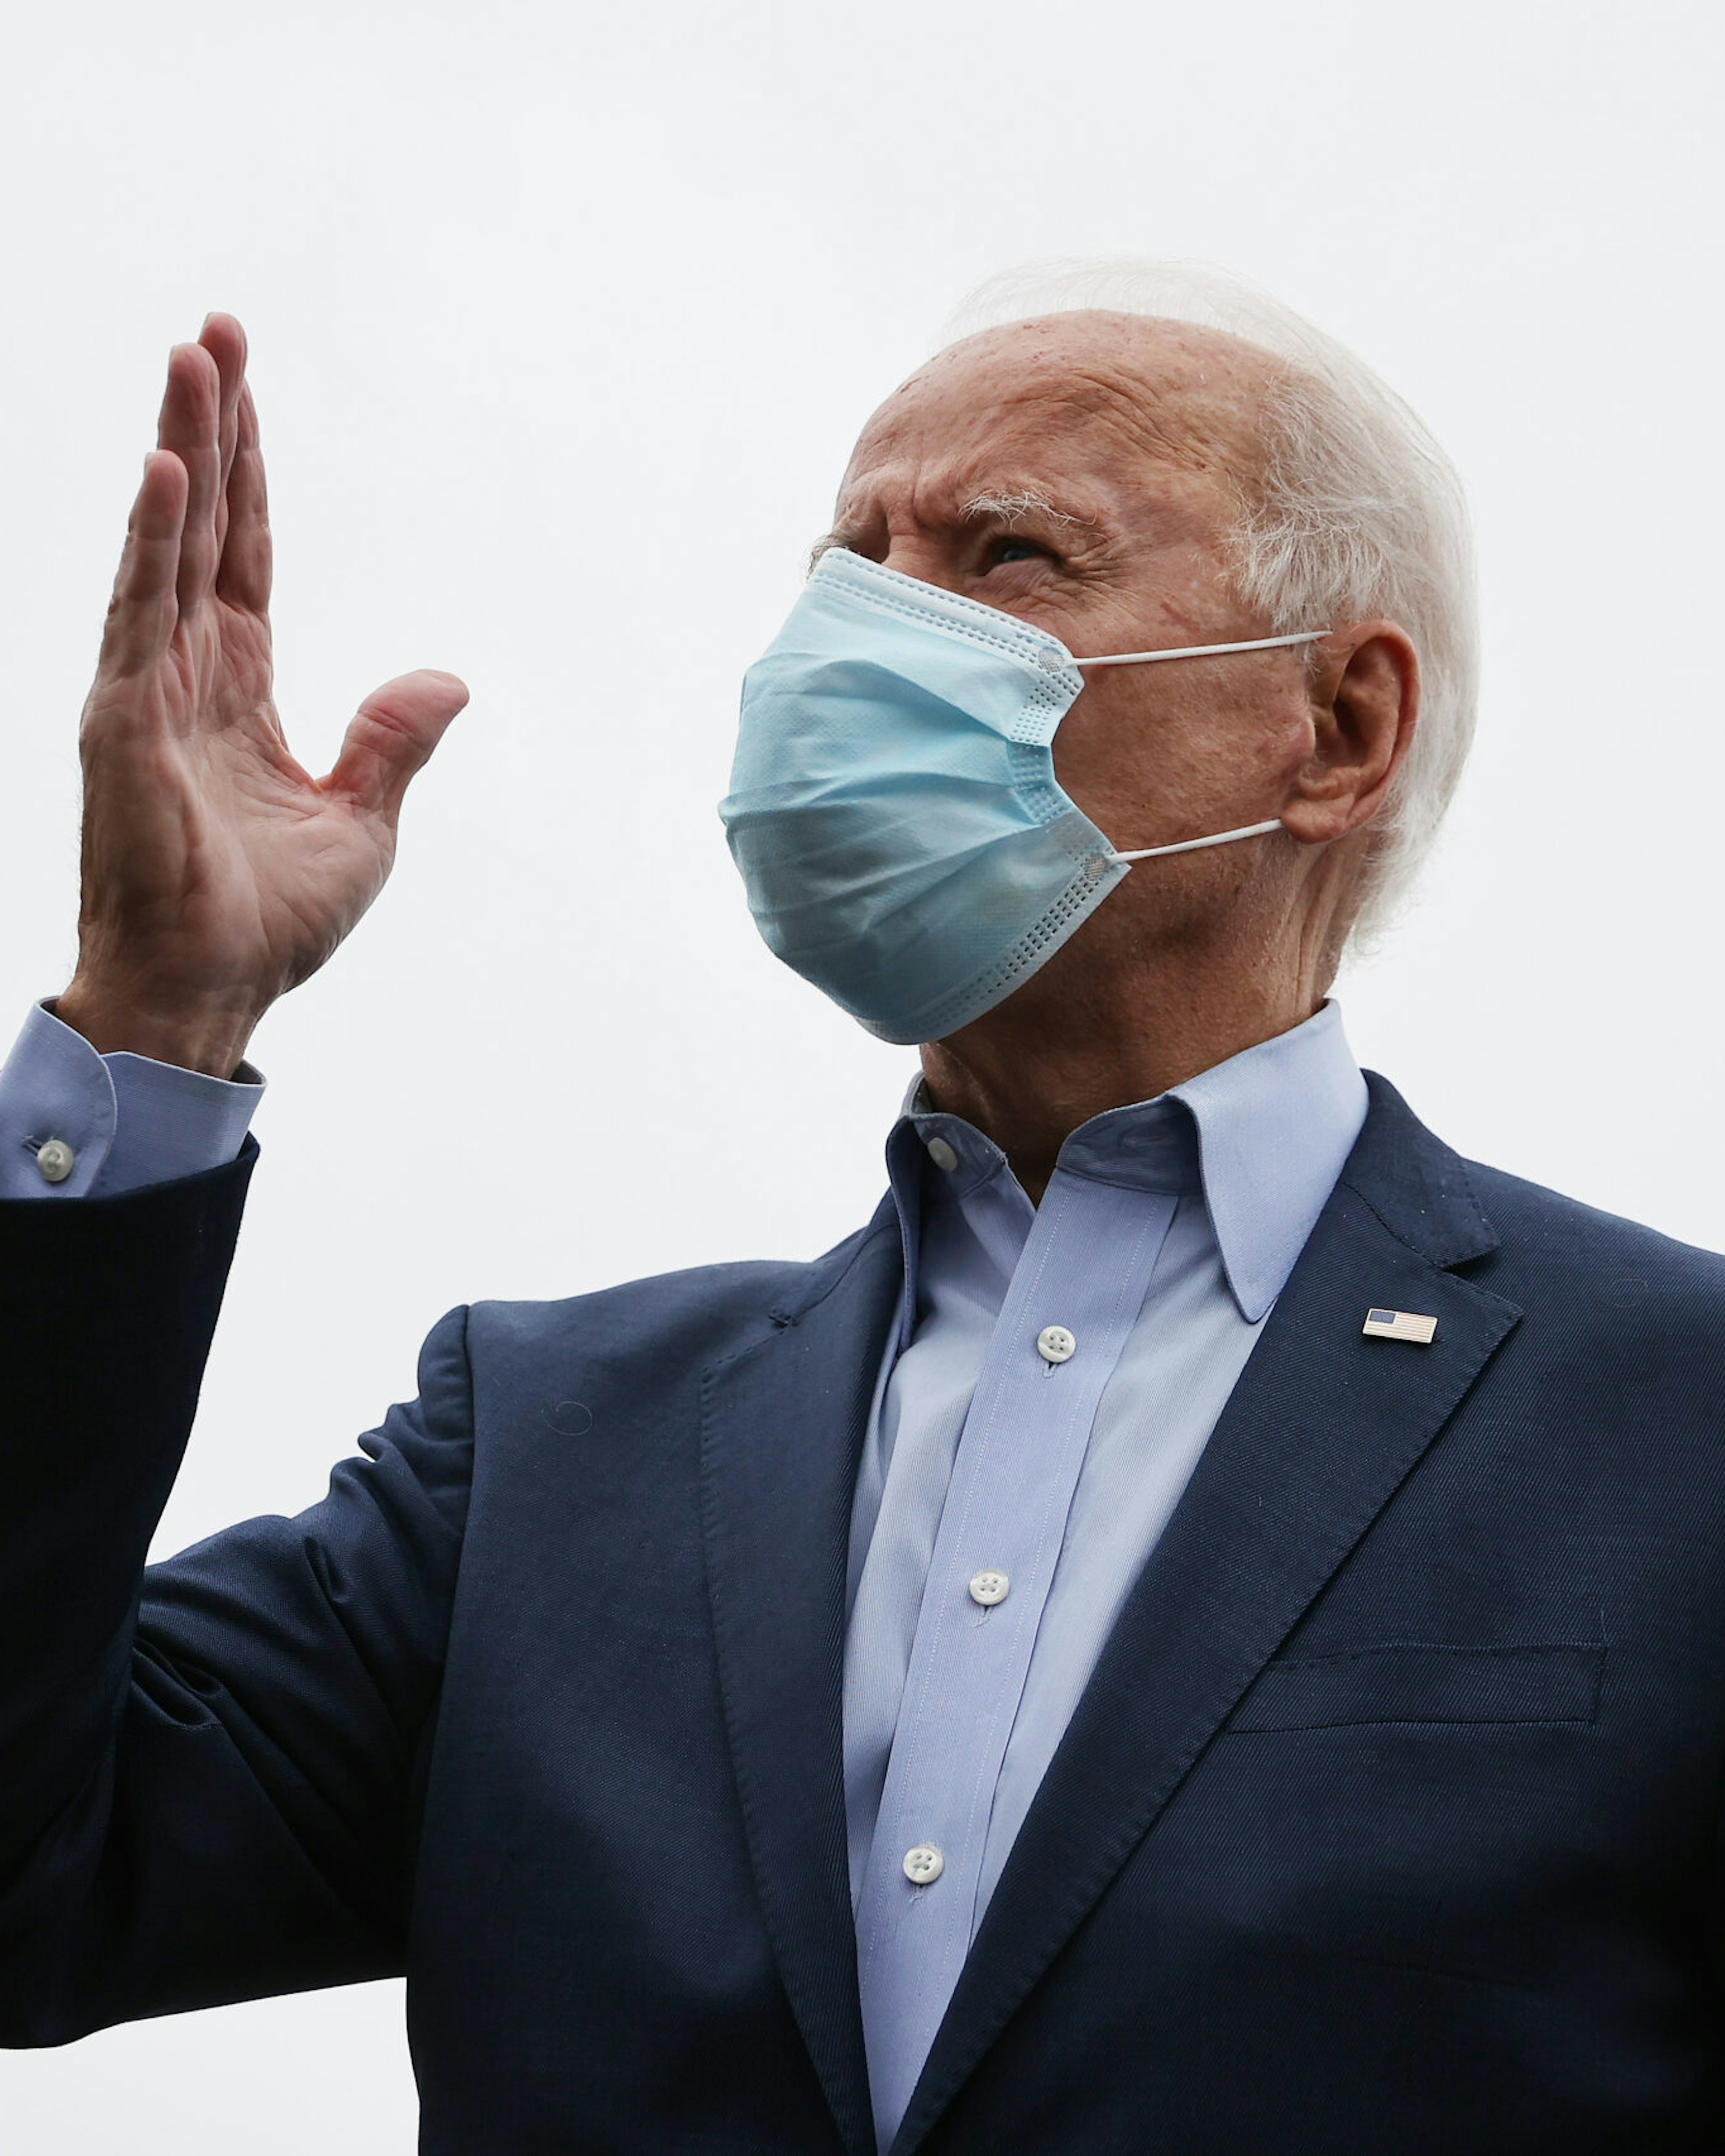 NEW CASTLE, DELAWARE - OCTOBER 12: Wearing a face mask to reduce the risk posed by the coronavirus, Democratic presidential nominee Joe Biden talks to reporters before boarding a flight to Ohio at New Castle County Airport October 12, 2020 in New Castle, Delaware. With 21 days until the election, Biden will campaign in Toledo and Cincinnati. (Photo by Chip Somodevilla/Getty Images)